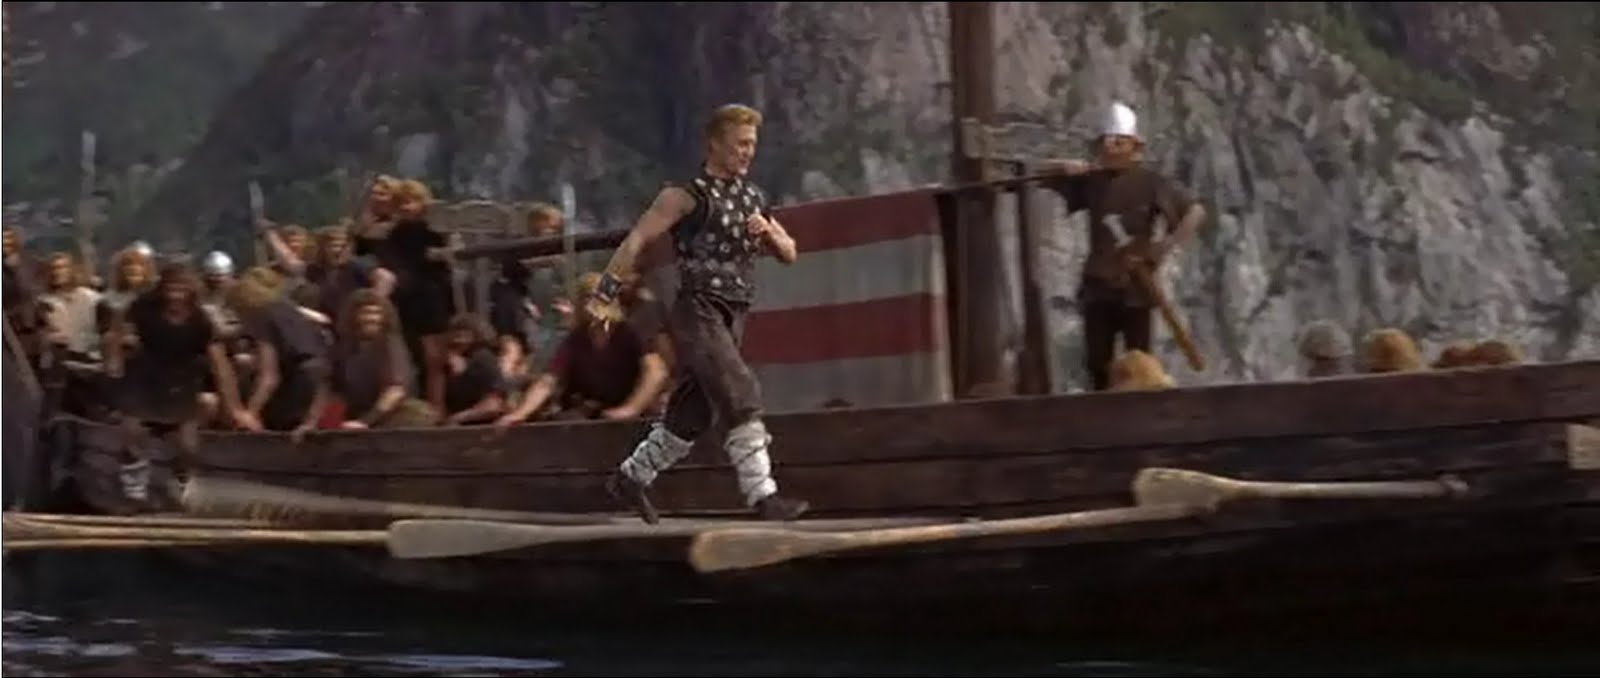 Image result for the vikings movie 1958 walking the oars